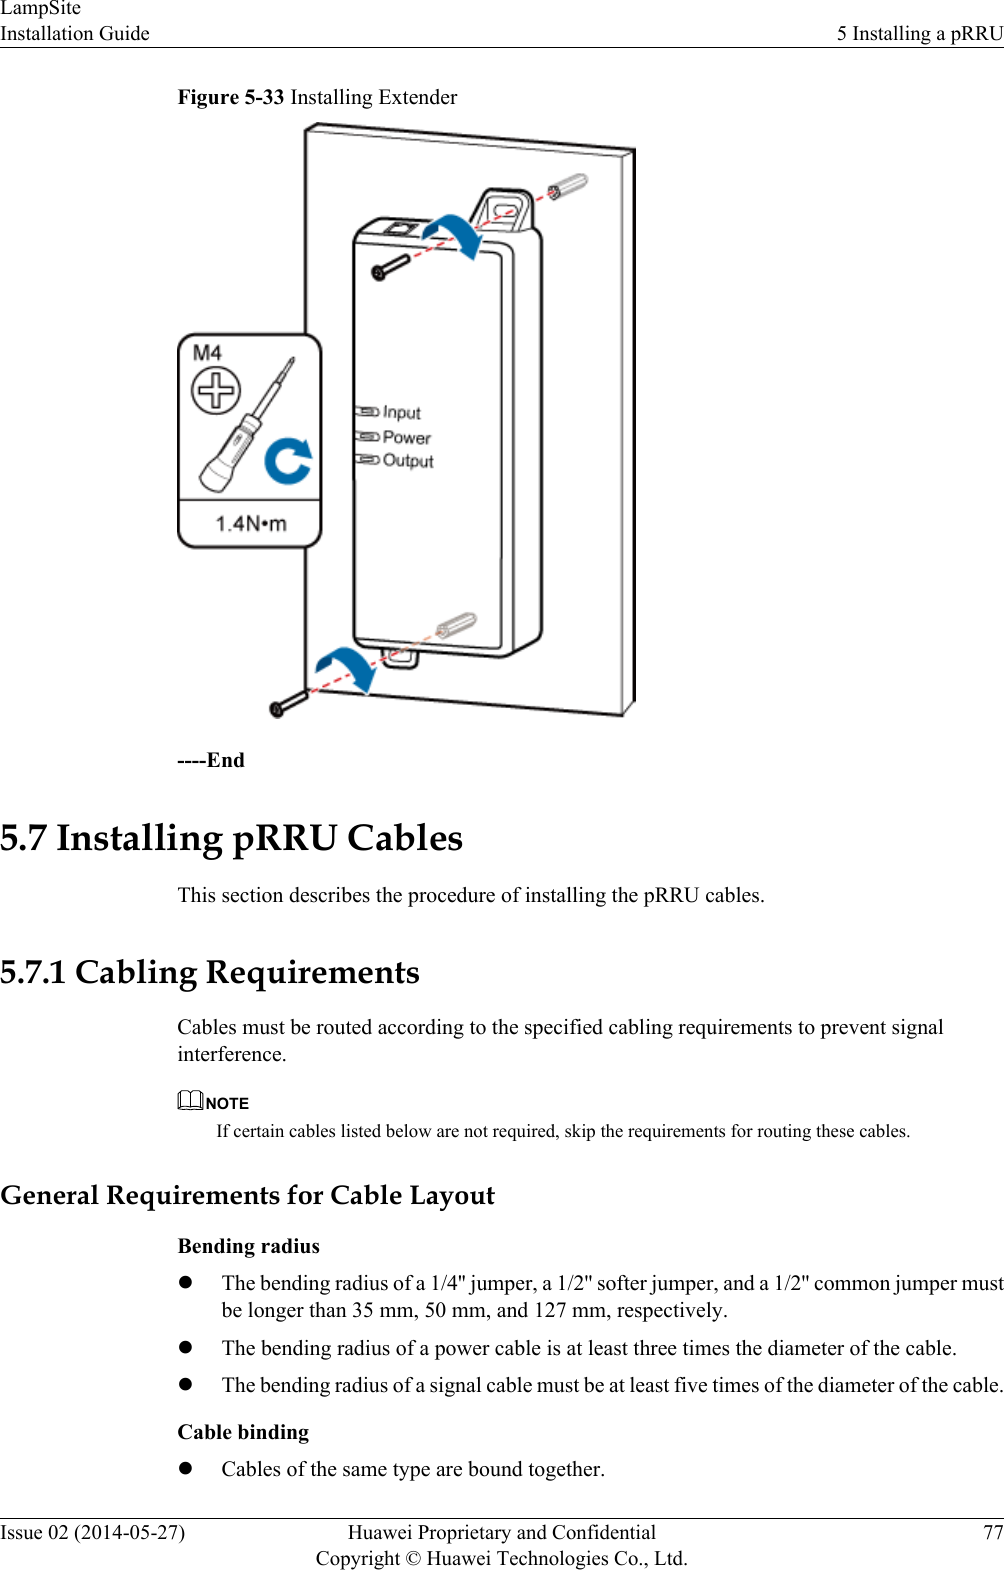 Figure 5-33 Installing Extender----End5.7 Installing pRRU CablesThis section describes the procedure of installing the pRRU cables.5.7.1 Cabling RequirementsCables must be routed according to the specified cabling requirements to prevent signalinterference.NOTEIf certain cables listed below are not required, skip the requirements for routing these cables.General Requirements for Cable LayoutBending radiuslThe bending radius of a 1/4&apos;&apos; jumper, a 1/2&apos;&apos; softer jumper, and a 1/2&apos;&apos; common jumper mustbe longer than 35 mm, 50 mm, and 127 mm, respectively.lThe bending radius of a power cable is at least three times the diameter of the cable.lThe bending radius of a signal cable must be at least five times of the diameter of the cable.Cable bindinglCables of the same type are bound together.LampSiteInstallation Guide 5 Installing a pRRUIssue 02 (2014-05-27) Huawei Proprietary and ConfidentialCopyright © Huawei Technologies Co., Ltd.77